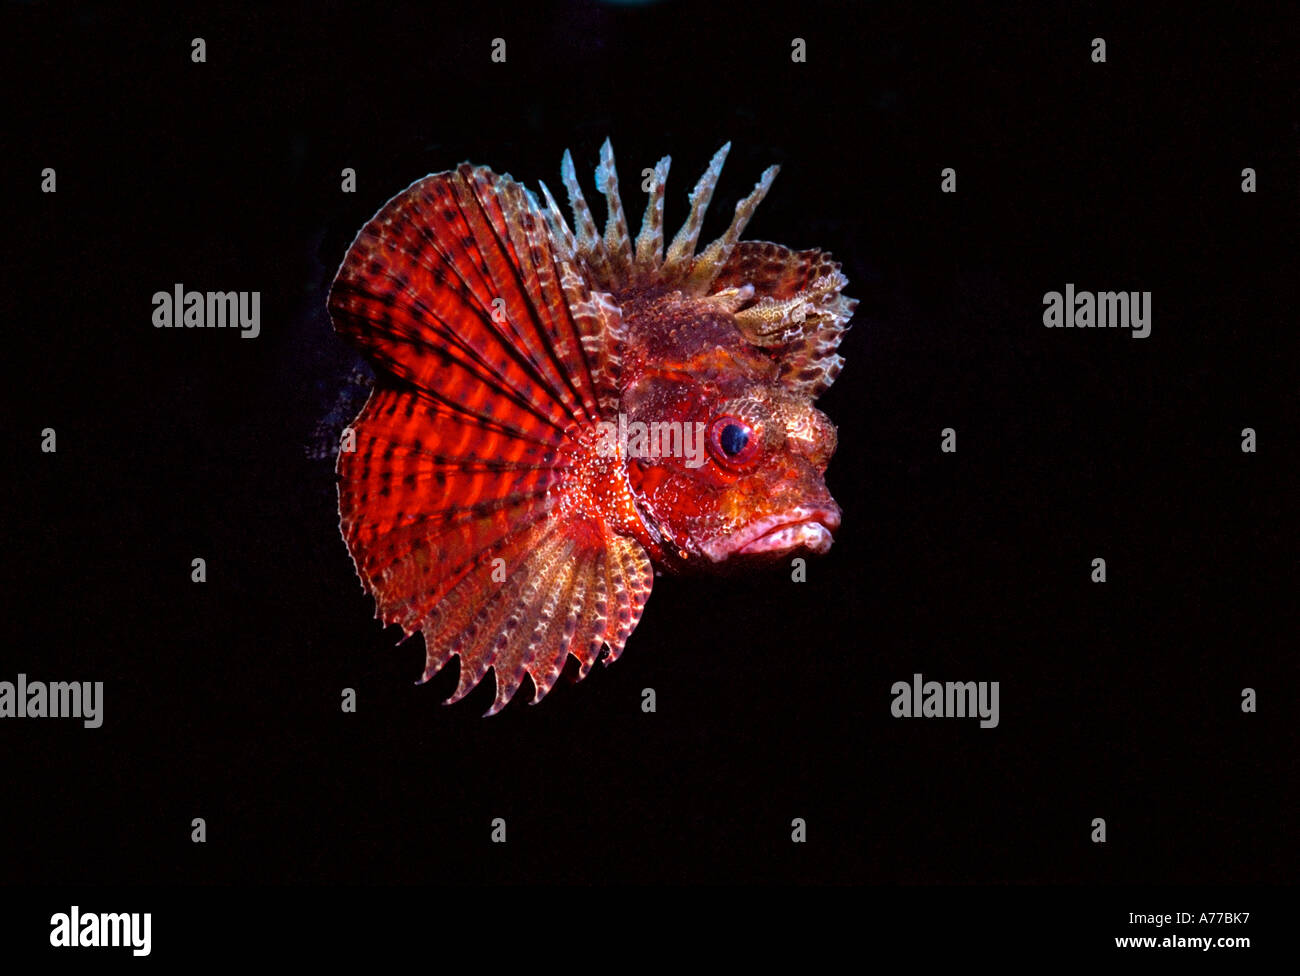 Close up profile of a red Shortfin lionfish (dendrochirus brachypterus) against a black background. Stock Photo